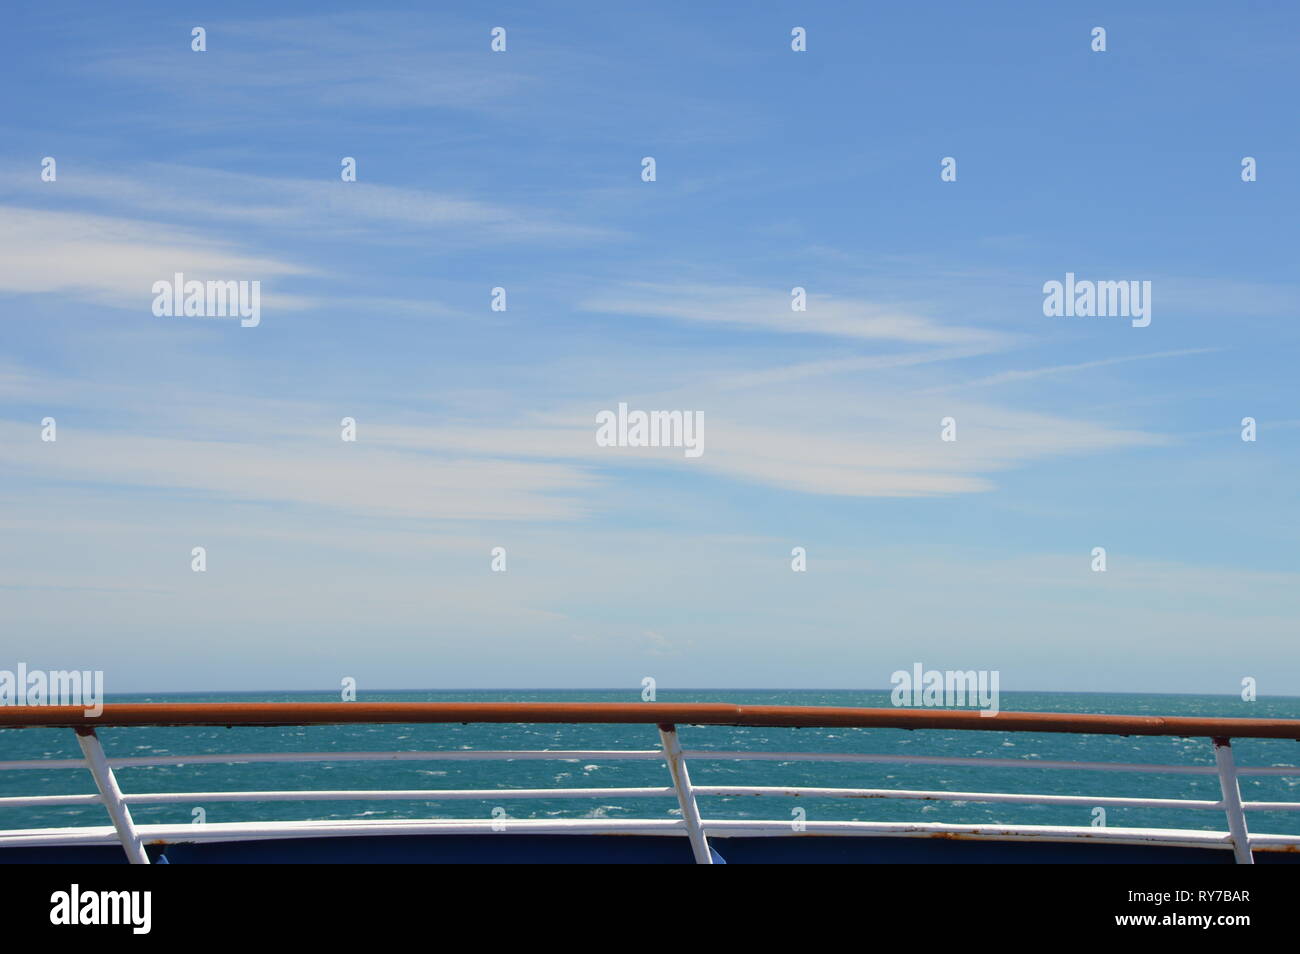 view from a ferryboat over the reling into the slightly cloudy endless sky   views on Tasman Sea Stock Photo